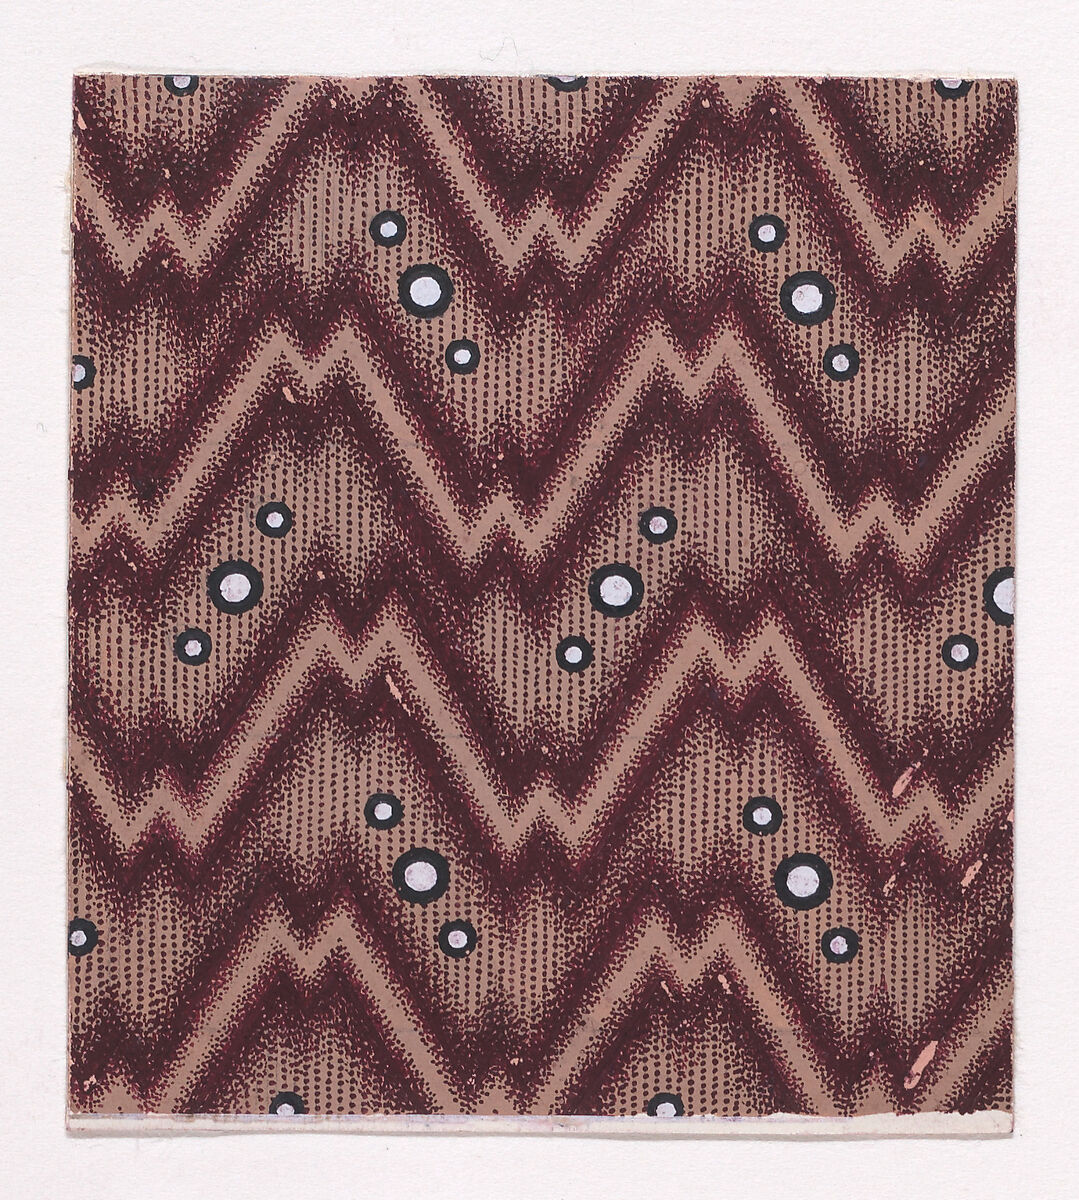 Textile Design of Horizontal Zig-Zagging Ribbons and Alternating Diagonal Groups of Three Pearls over a Striped Background, Anonymous, Alsatian, 19th century, Gouache 